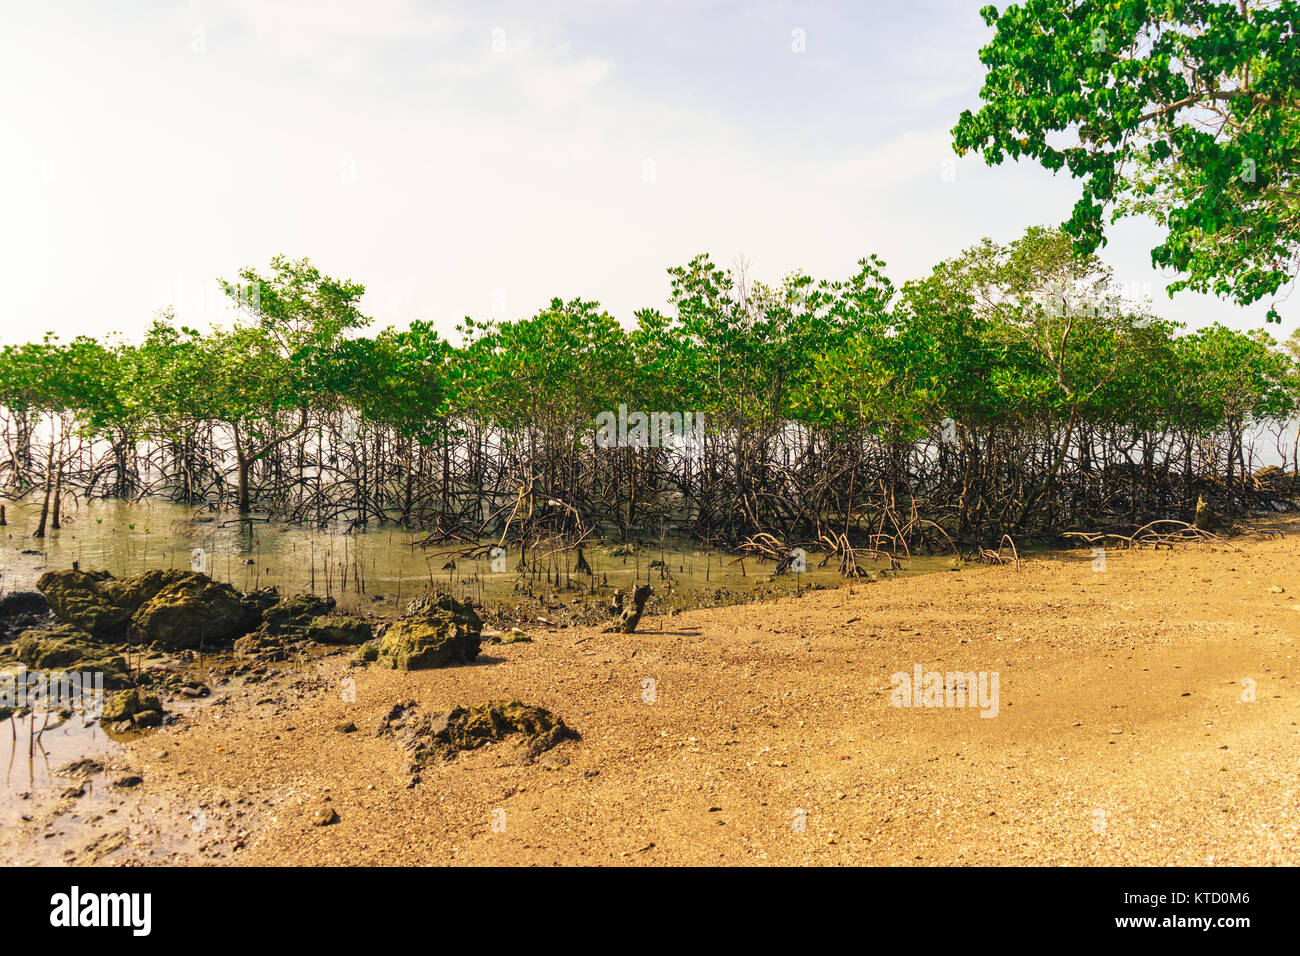 The mangrove forest on the island Stock Photo